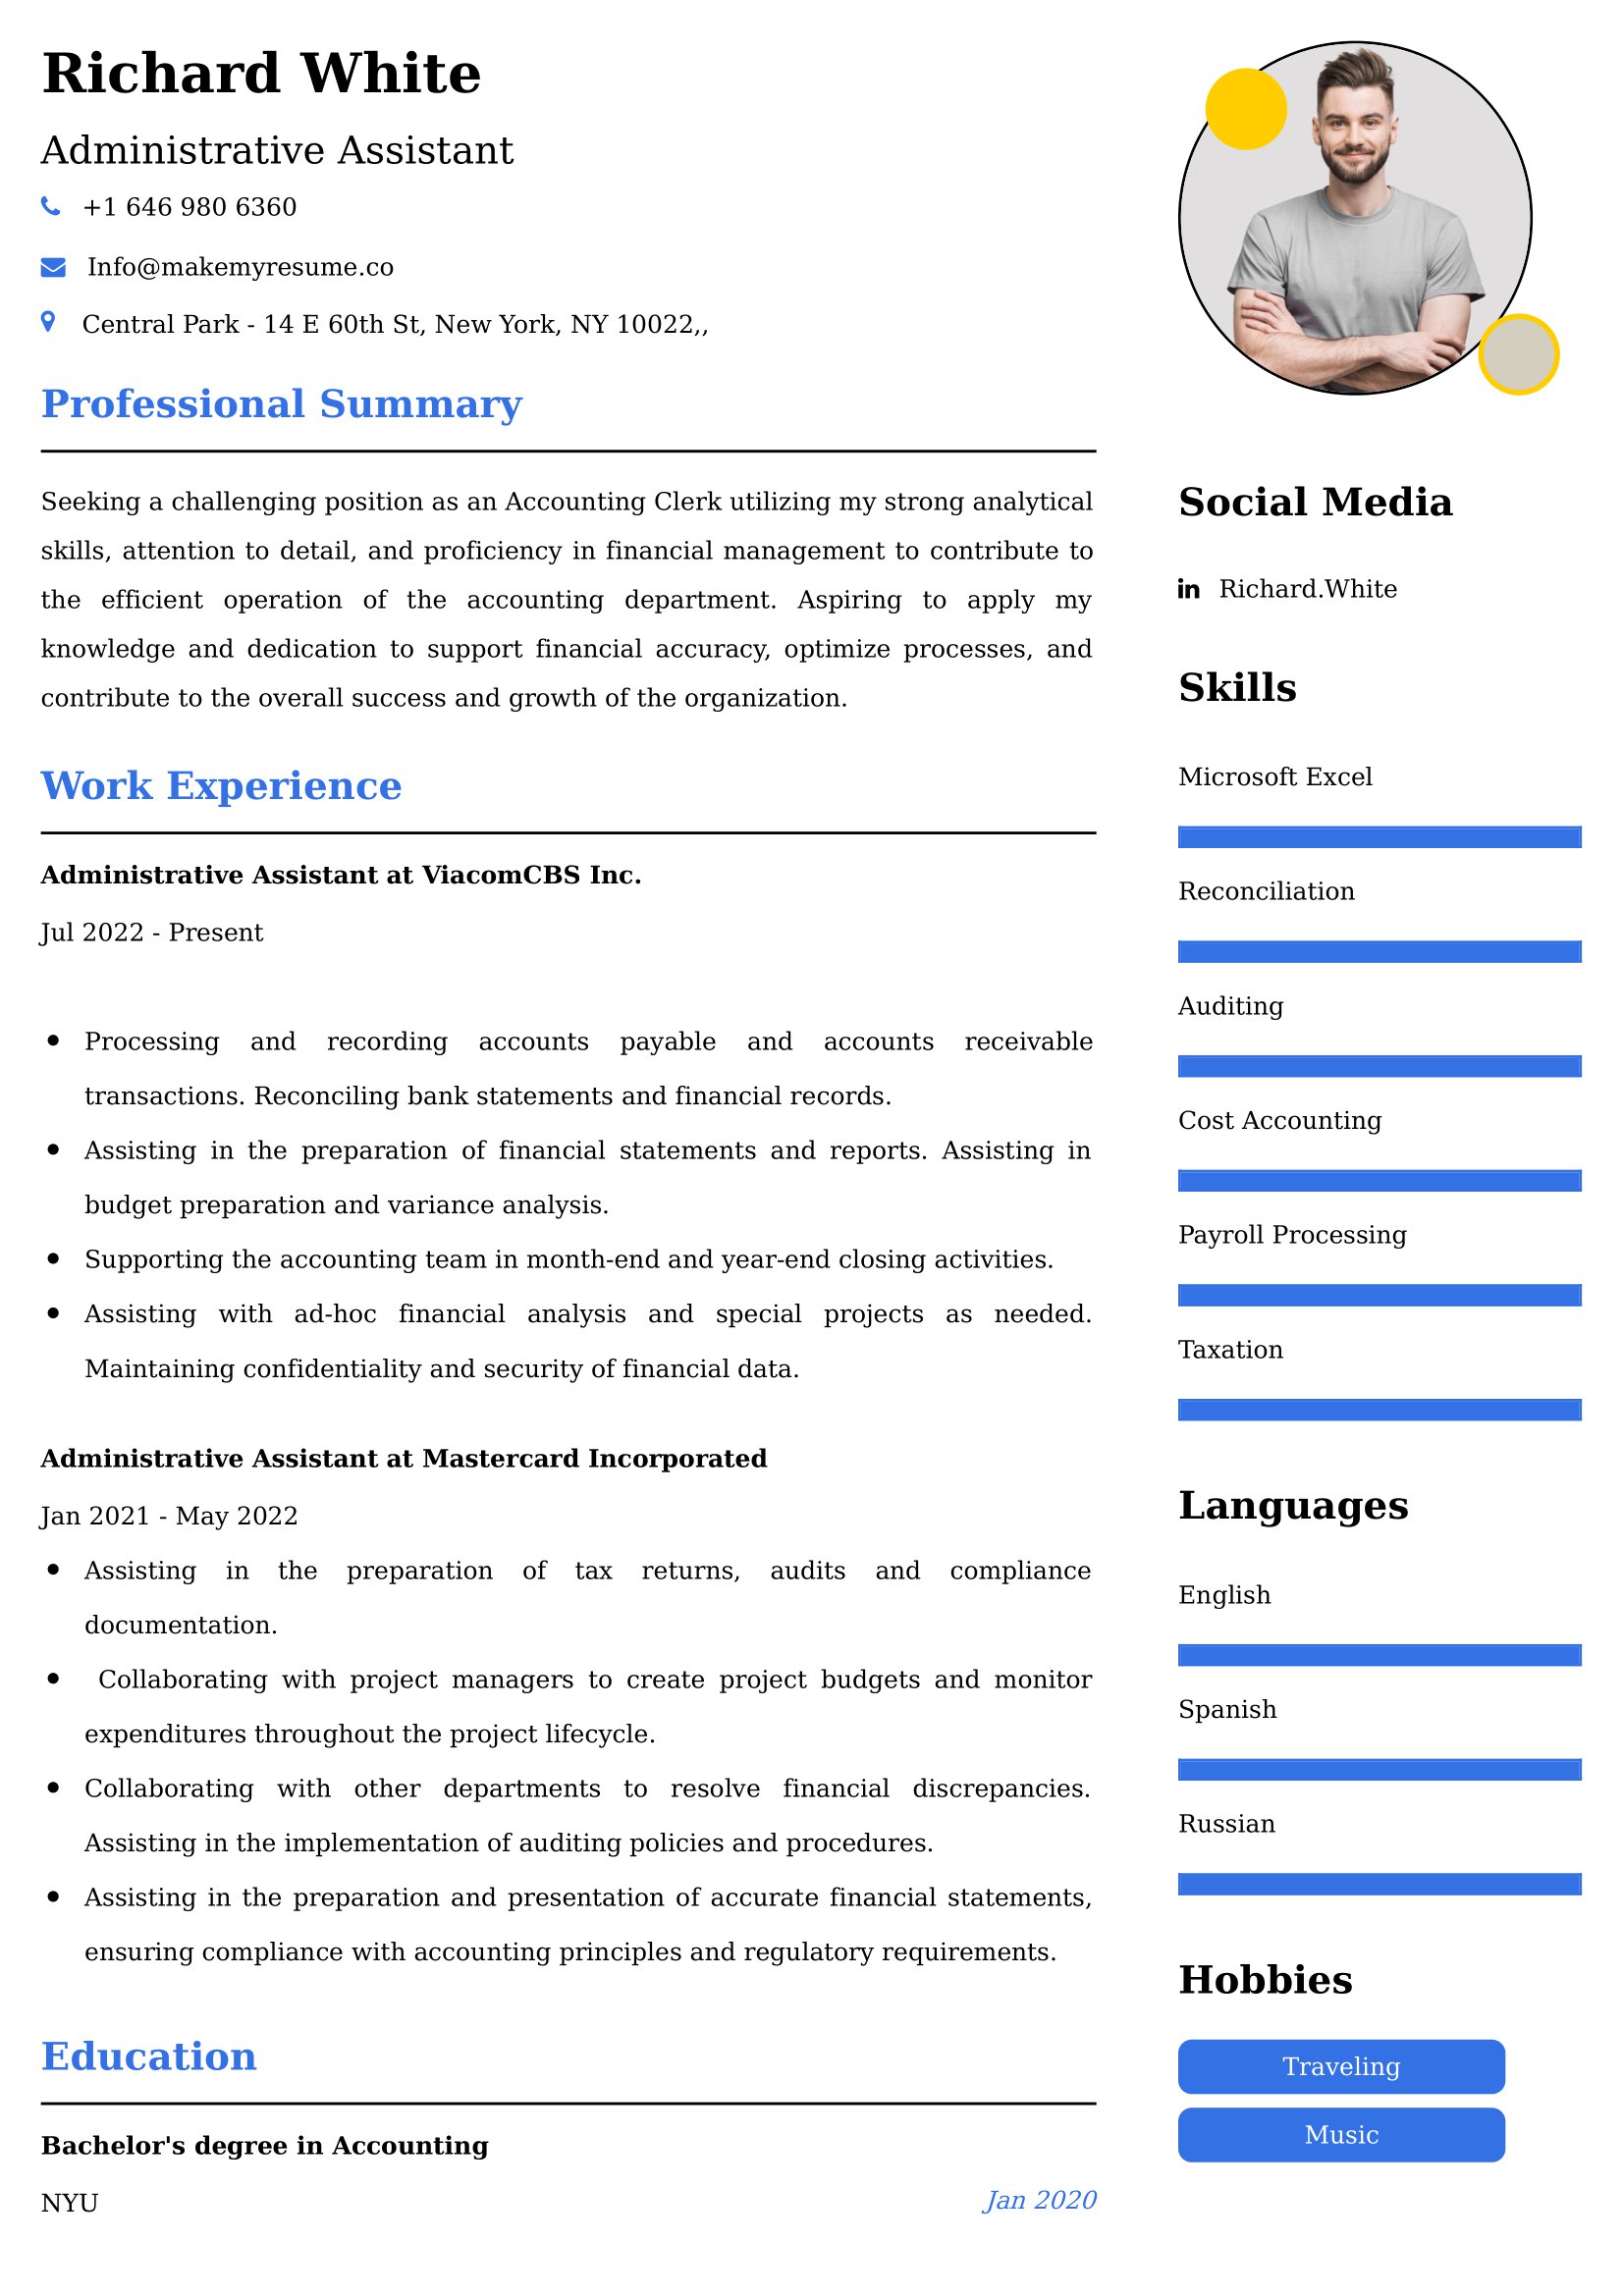 42+ Professional Administrative Resume Examples, Latest CV Format